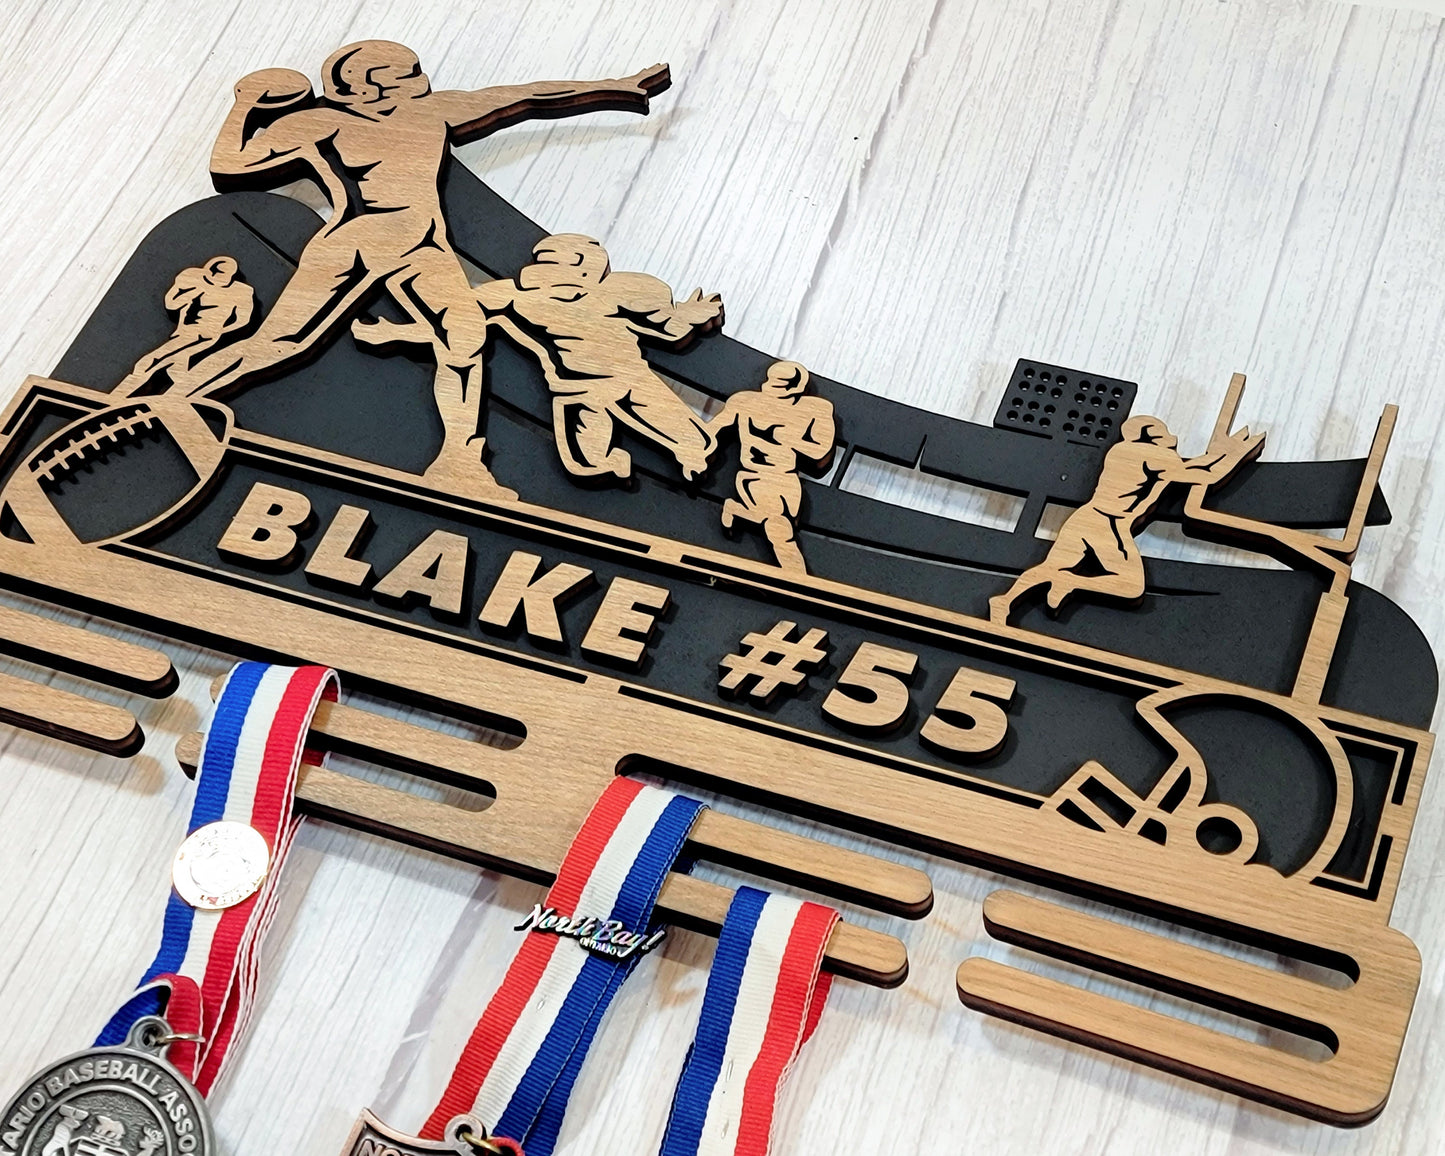 Stadium Series Medal Holders - Football - Male and Female Versions Included - SVG Files - Sized for Glowforge